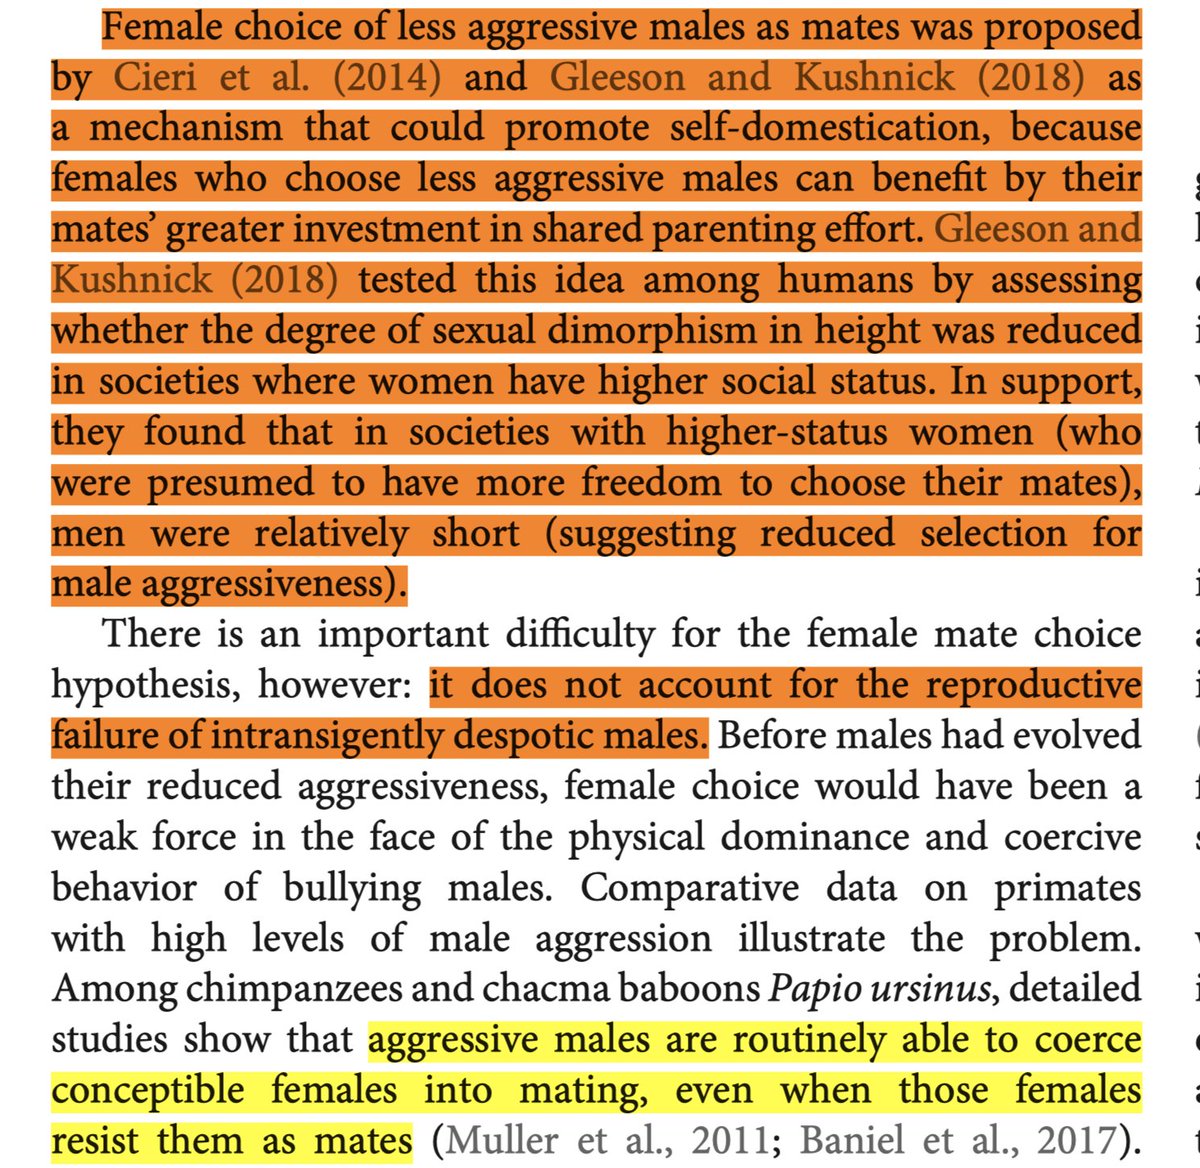 Is women's choice a factor in men's domestication? Maybe. In populations where women have higher status and are more free to choose their mates, men are less tall relative to women- indicating reduced selection for male aggressiveness. frontiersin.org/journals/psych…